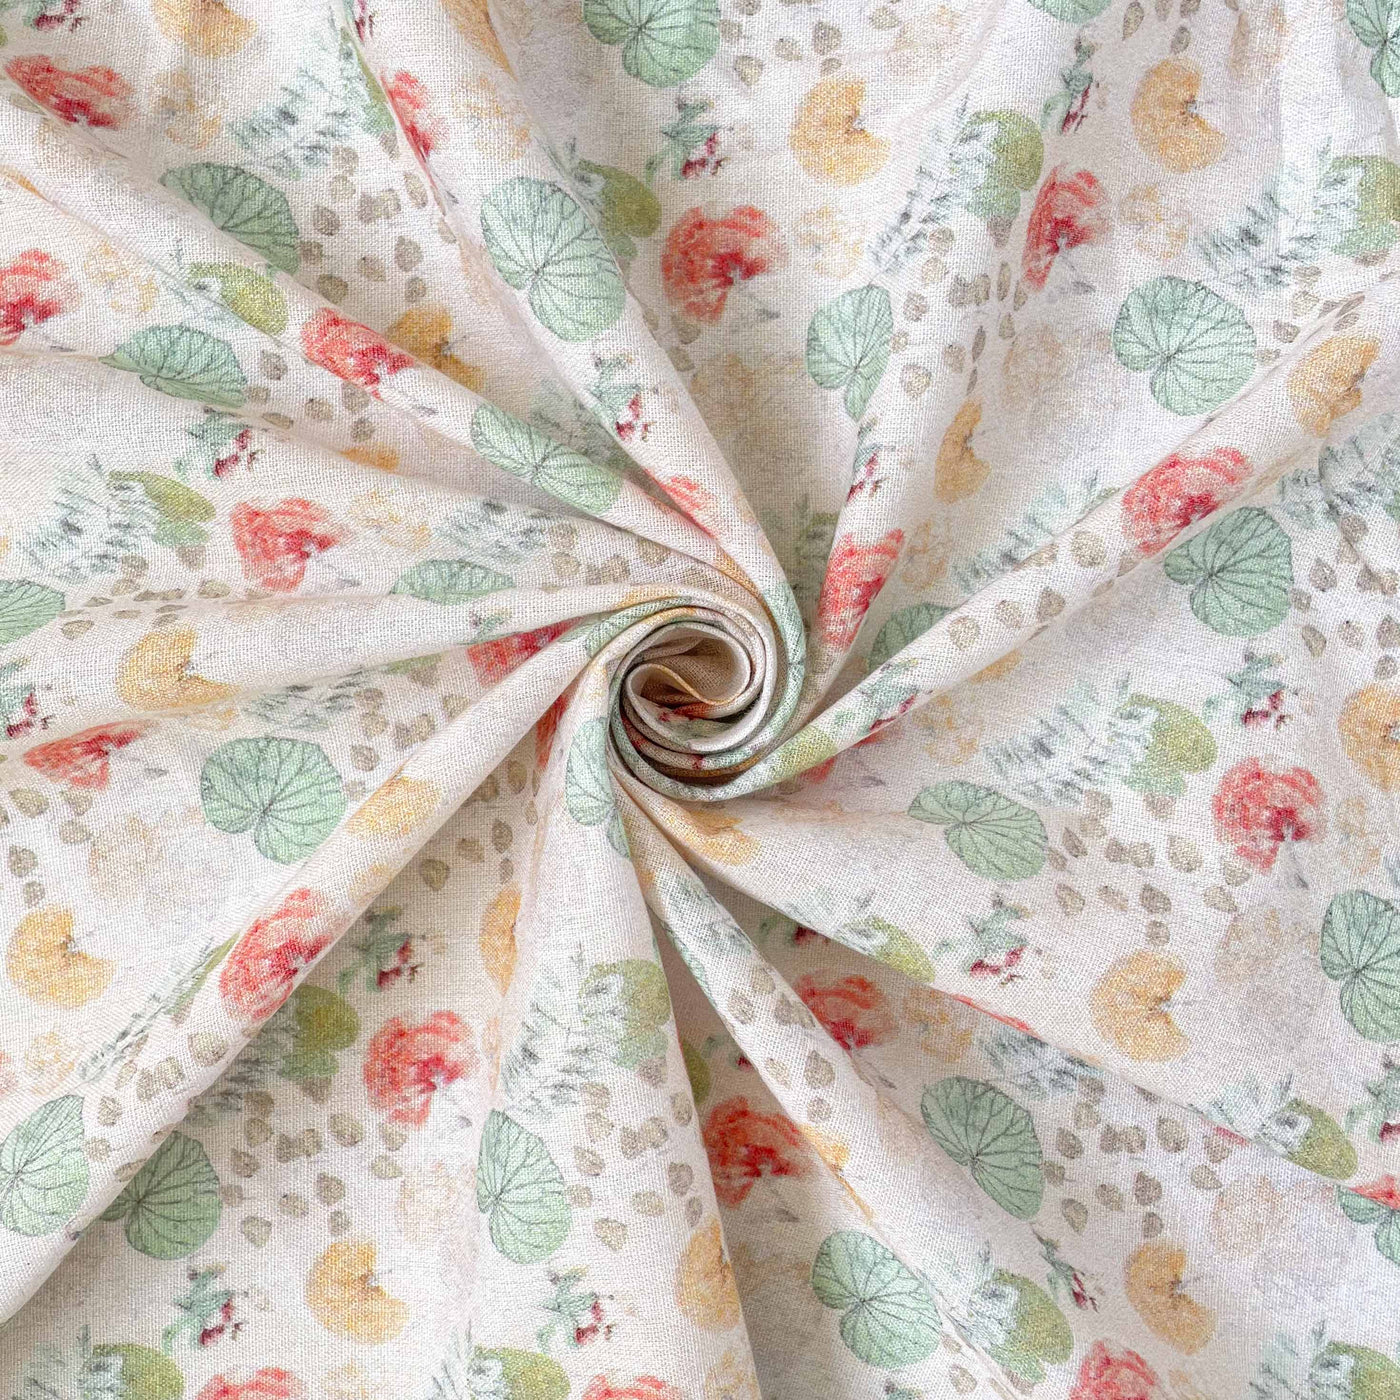 Printed Cotton Linen Fabric Cut Piece (CUT PIECE) Colorful Treasured Blooms Printed Pure Cotton Linen Fabric (Width 44 Inches)